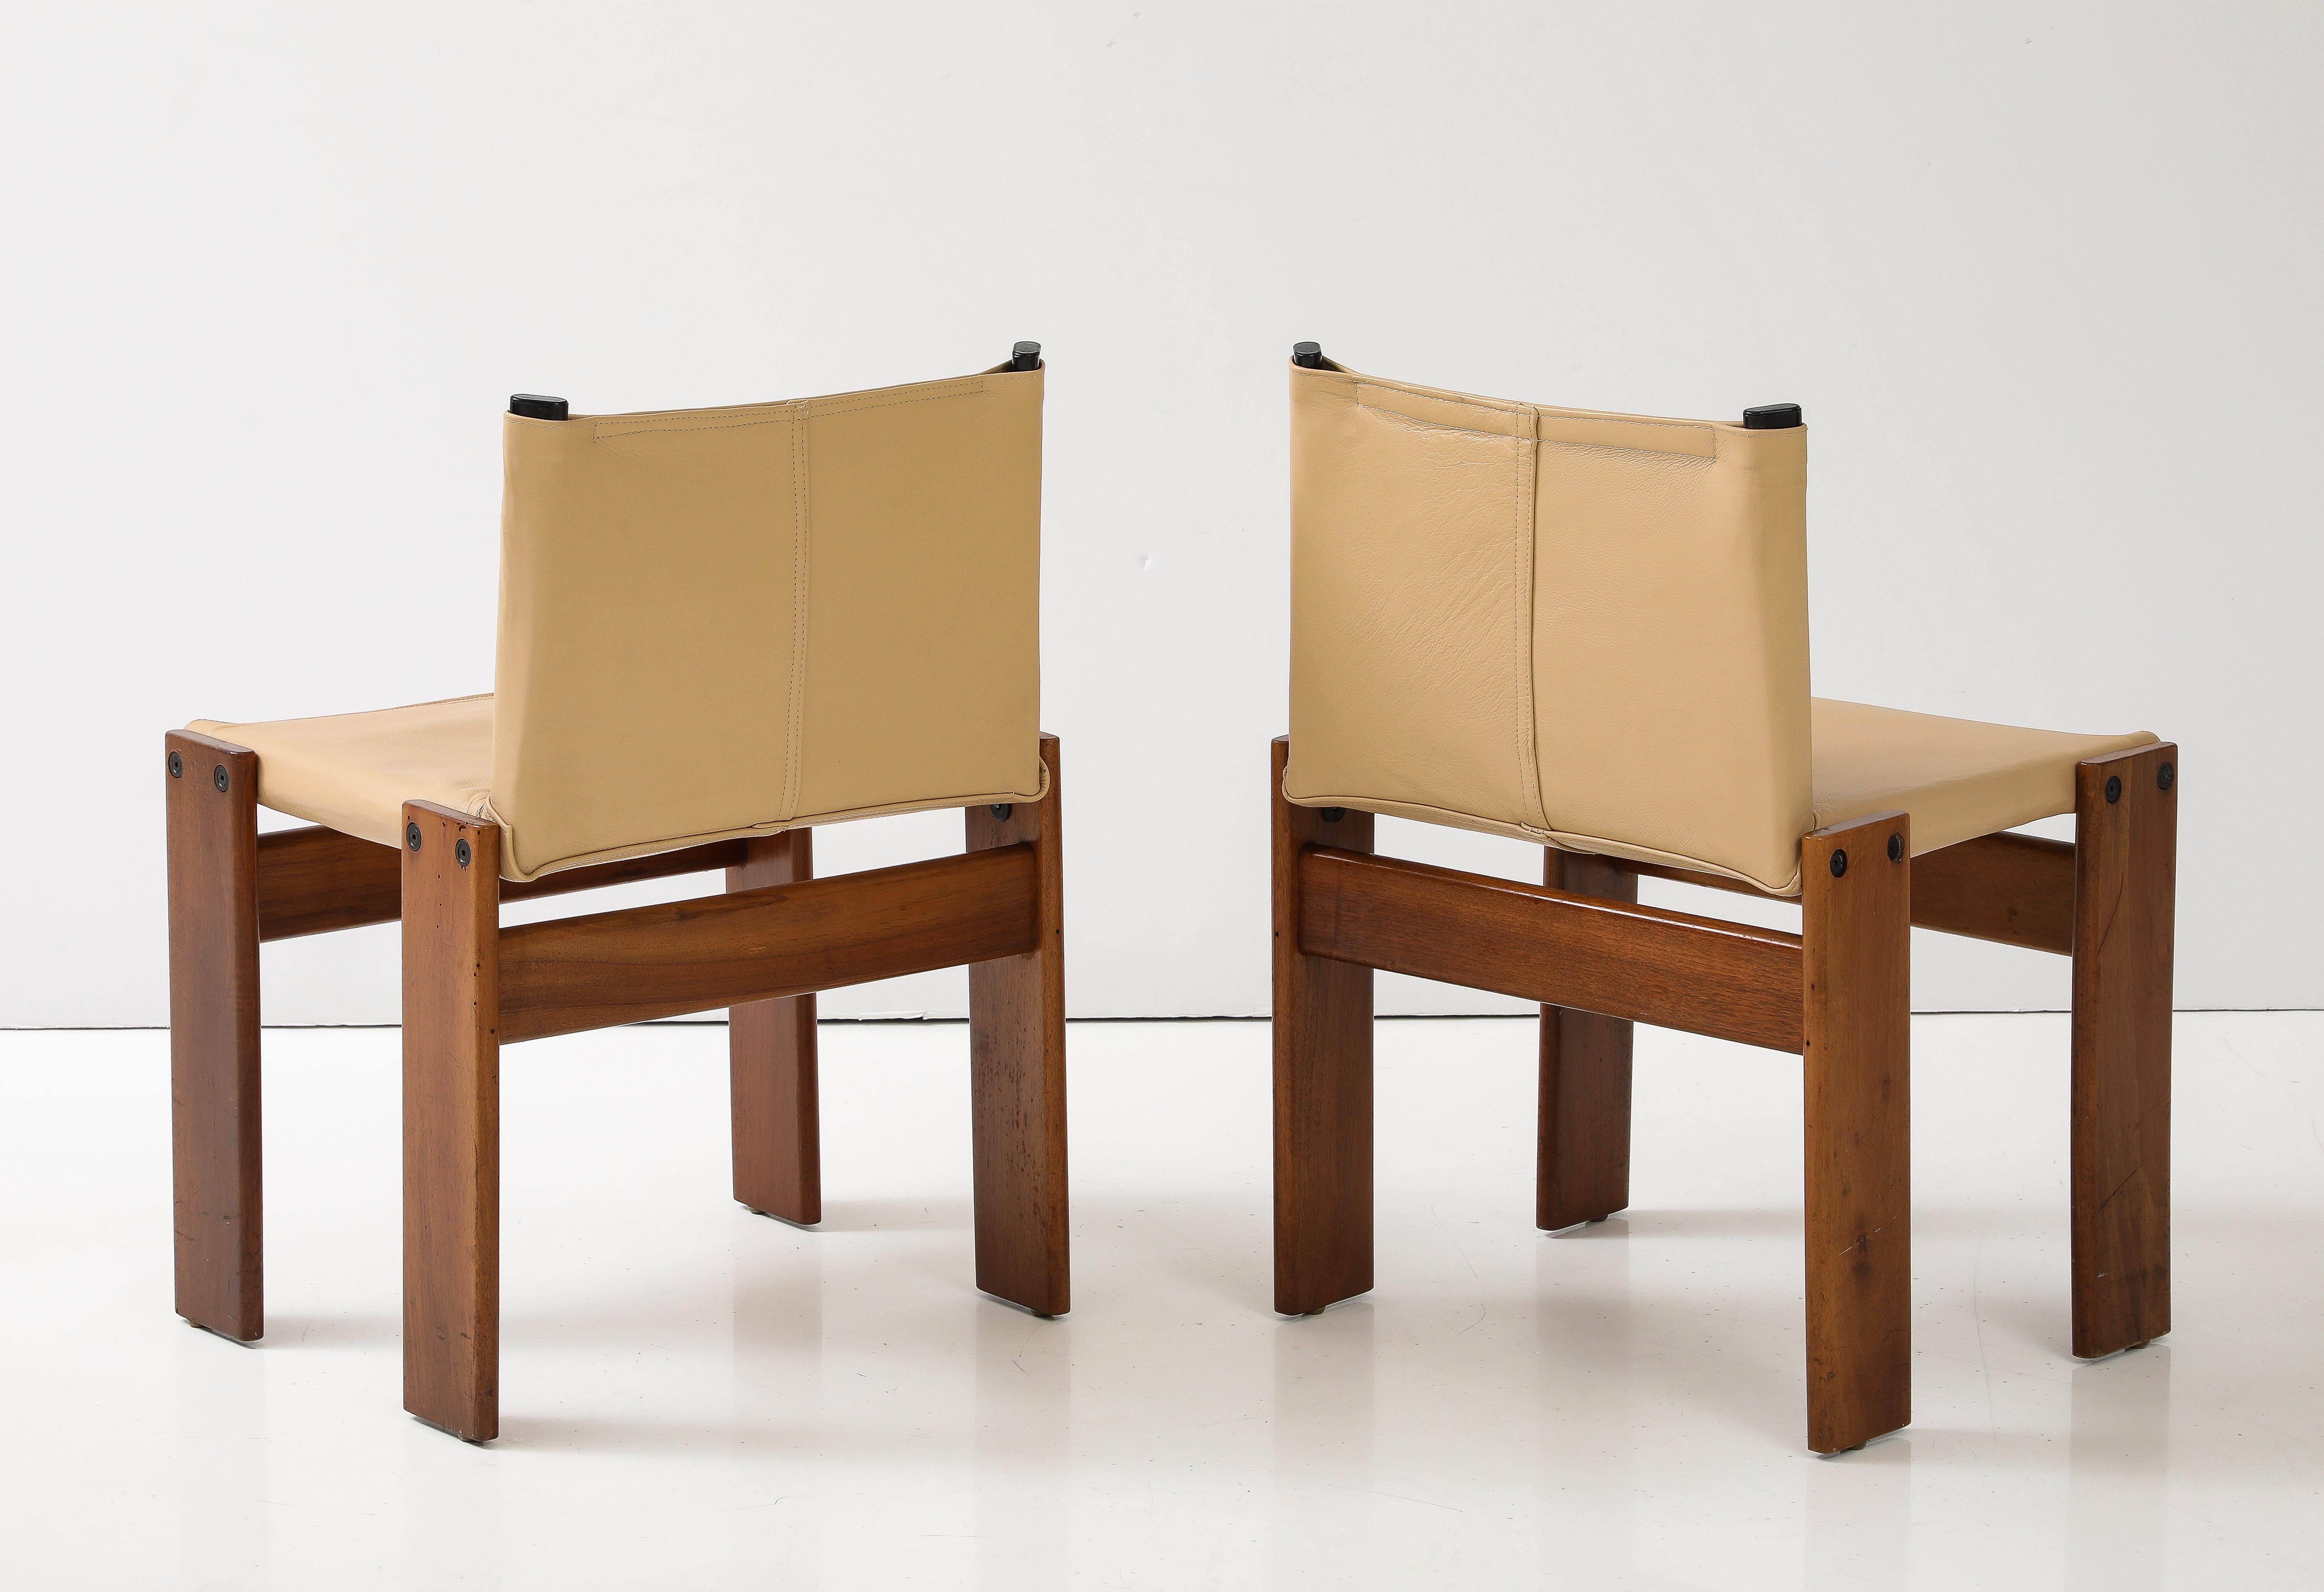 Afra and Tobia Scarpa Pair of 'Monk' Chairs for Molteni, Italy, circa 1974  For Sale 7